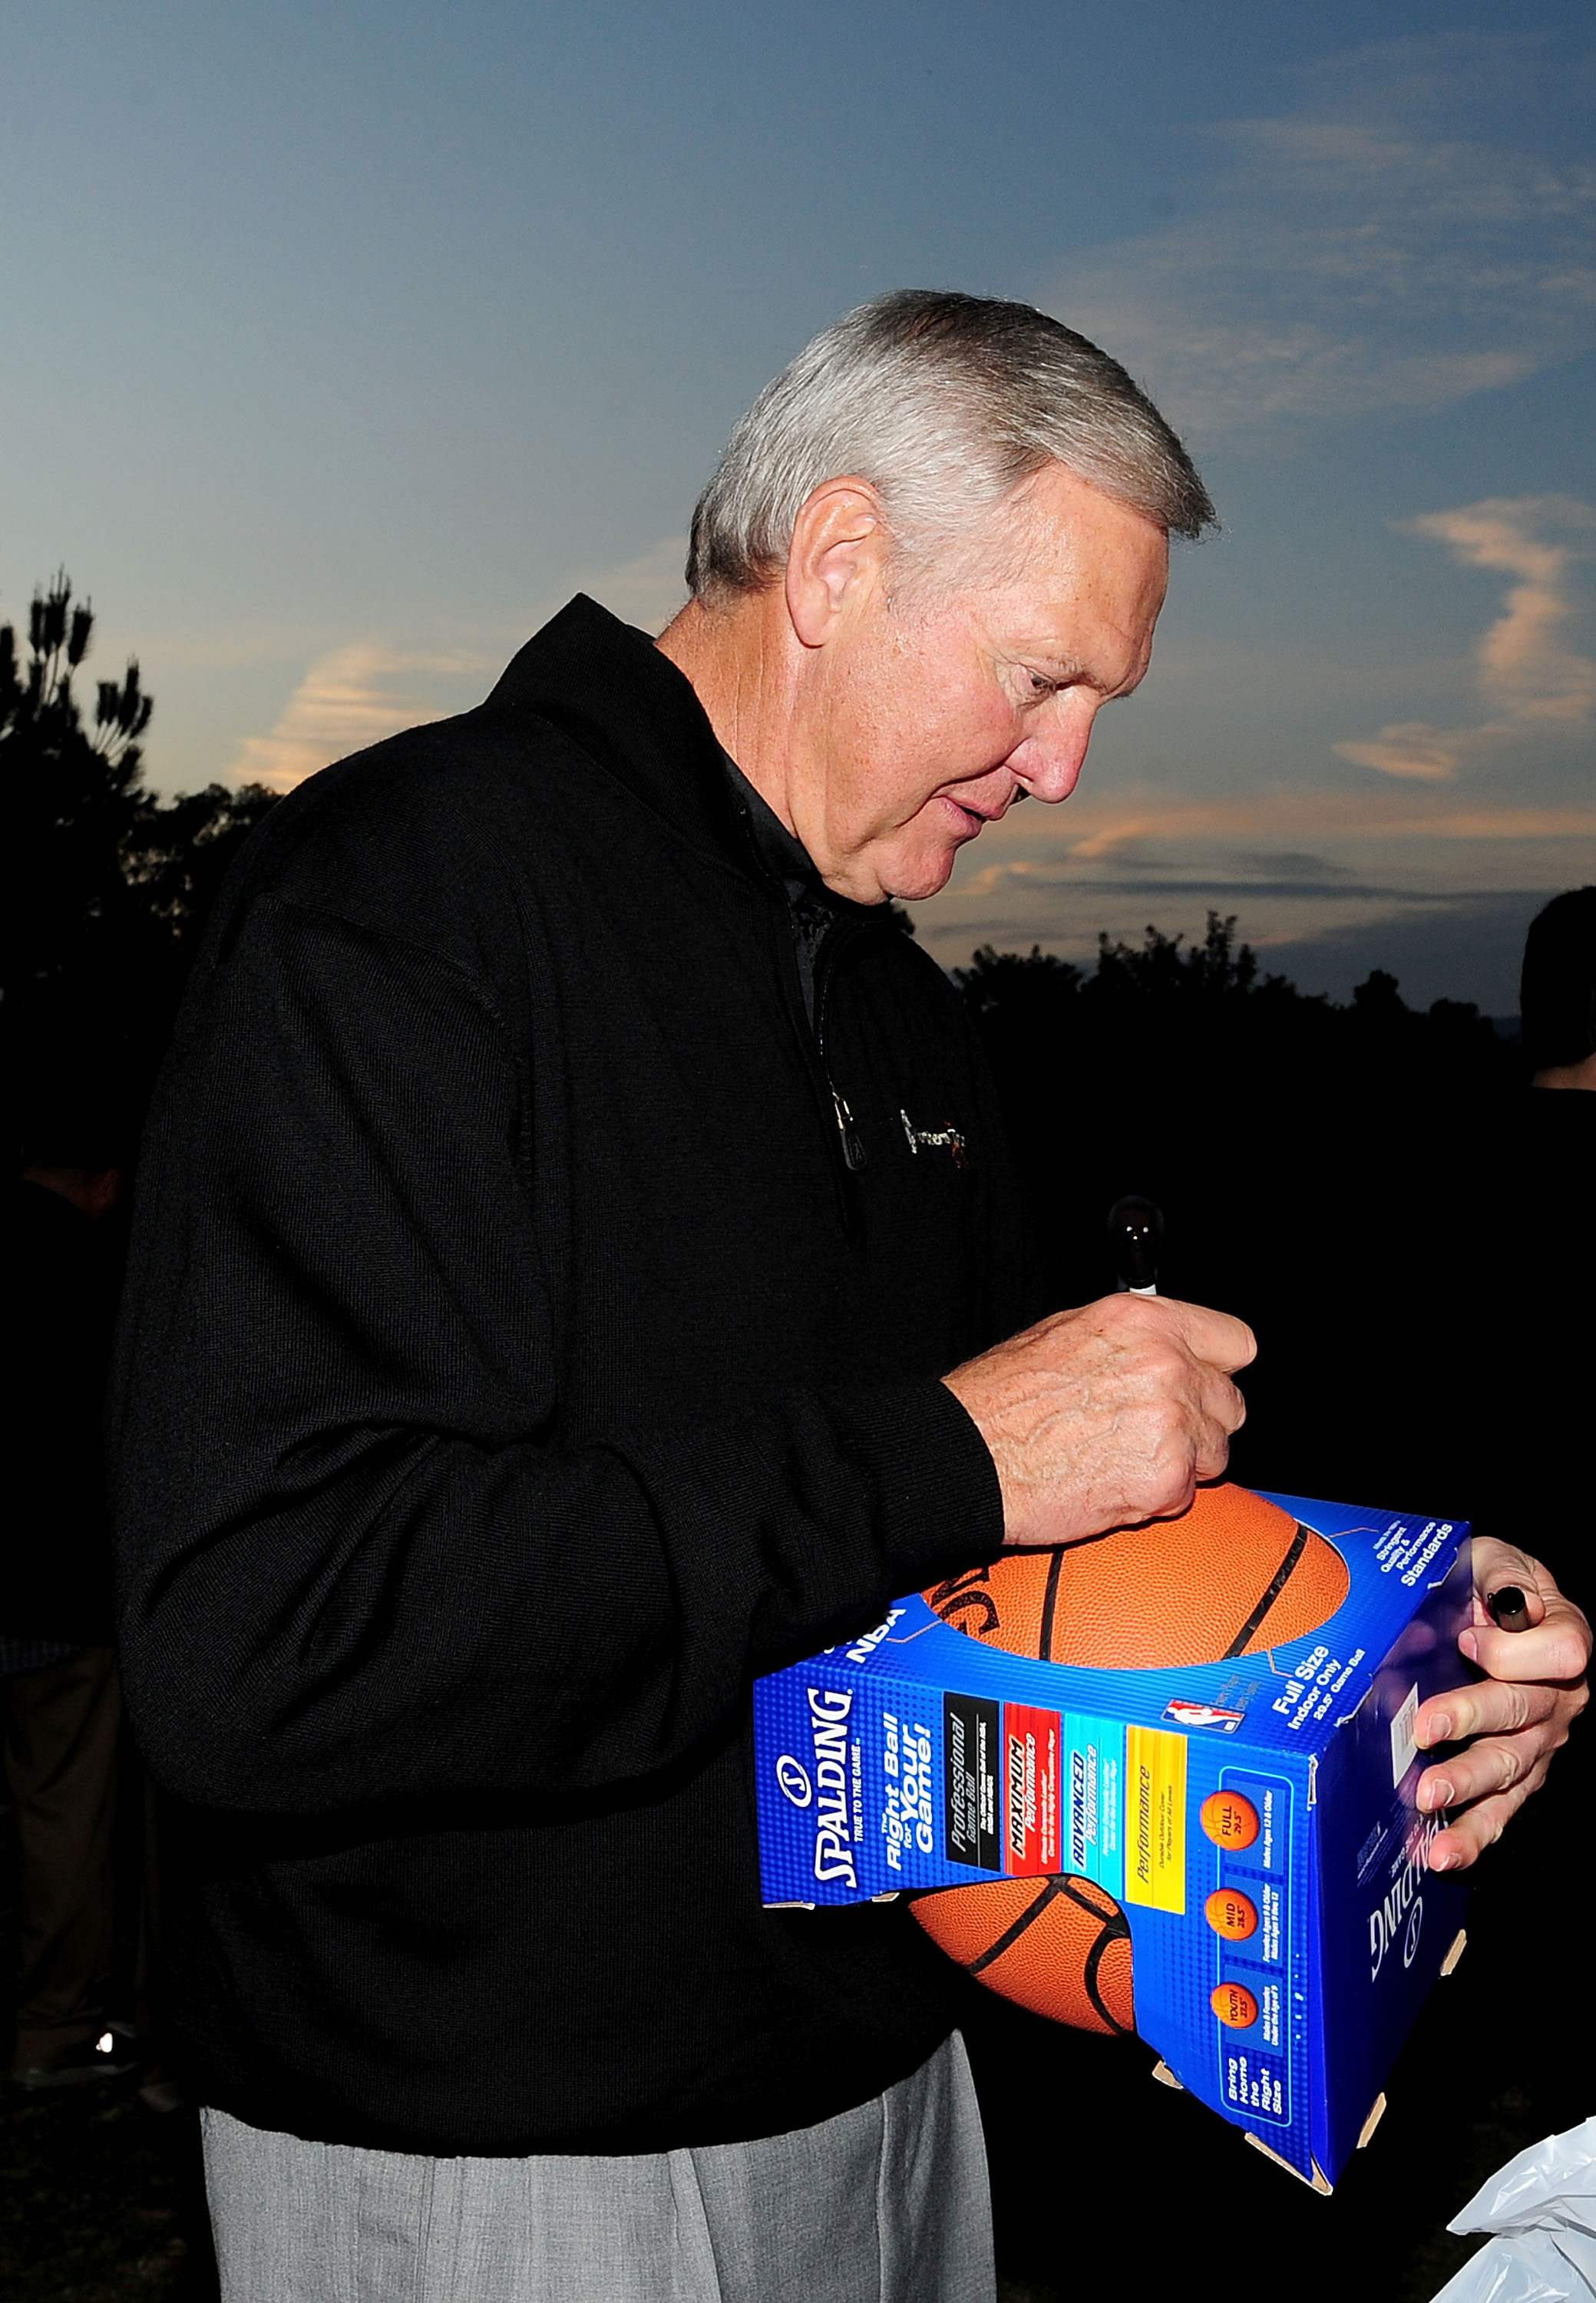 PACIFIC PALISADES, CA - FEBRUARY 02:  Jerry West signs autographs at the PGA Tour Golf Picnic before the start of the Northern Trust Open  on February 2, 2010 in Pacific Palisades, California.  (Photo by Jacob de Golish/Getty Images)